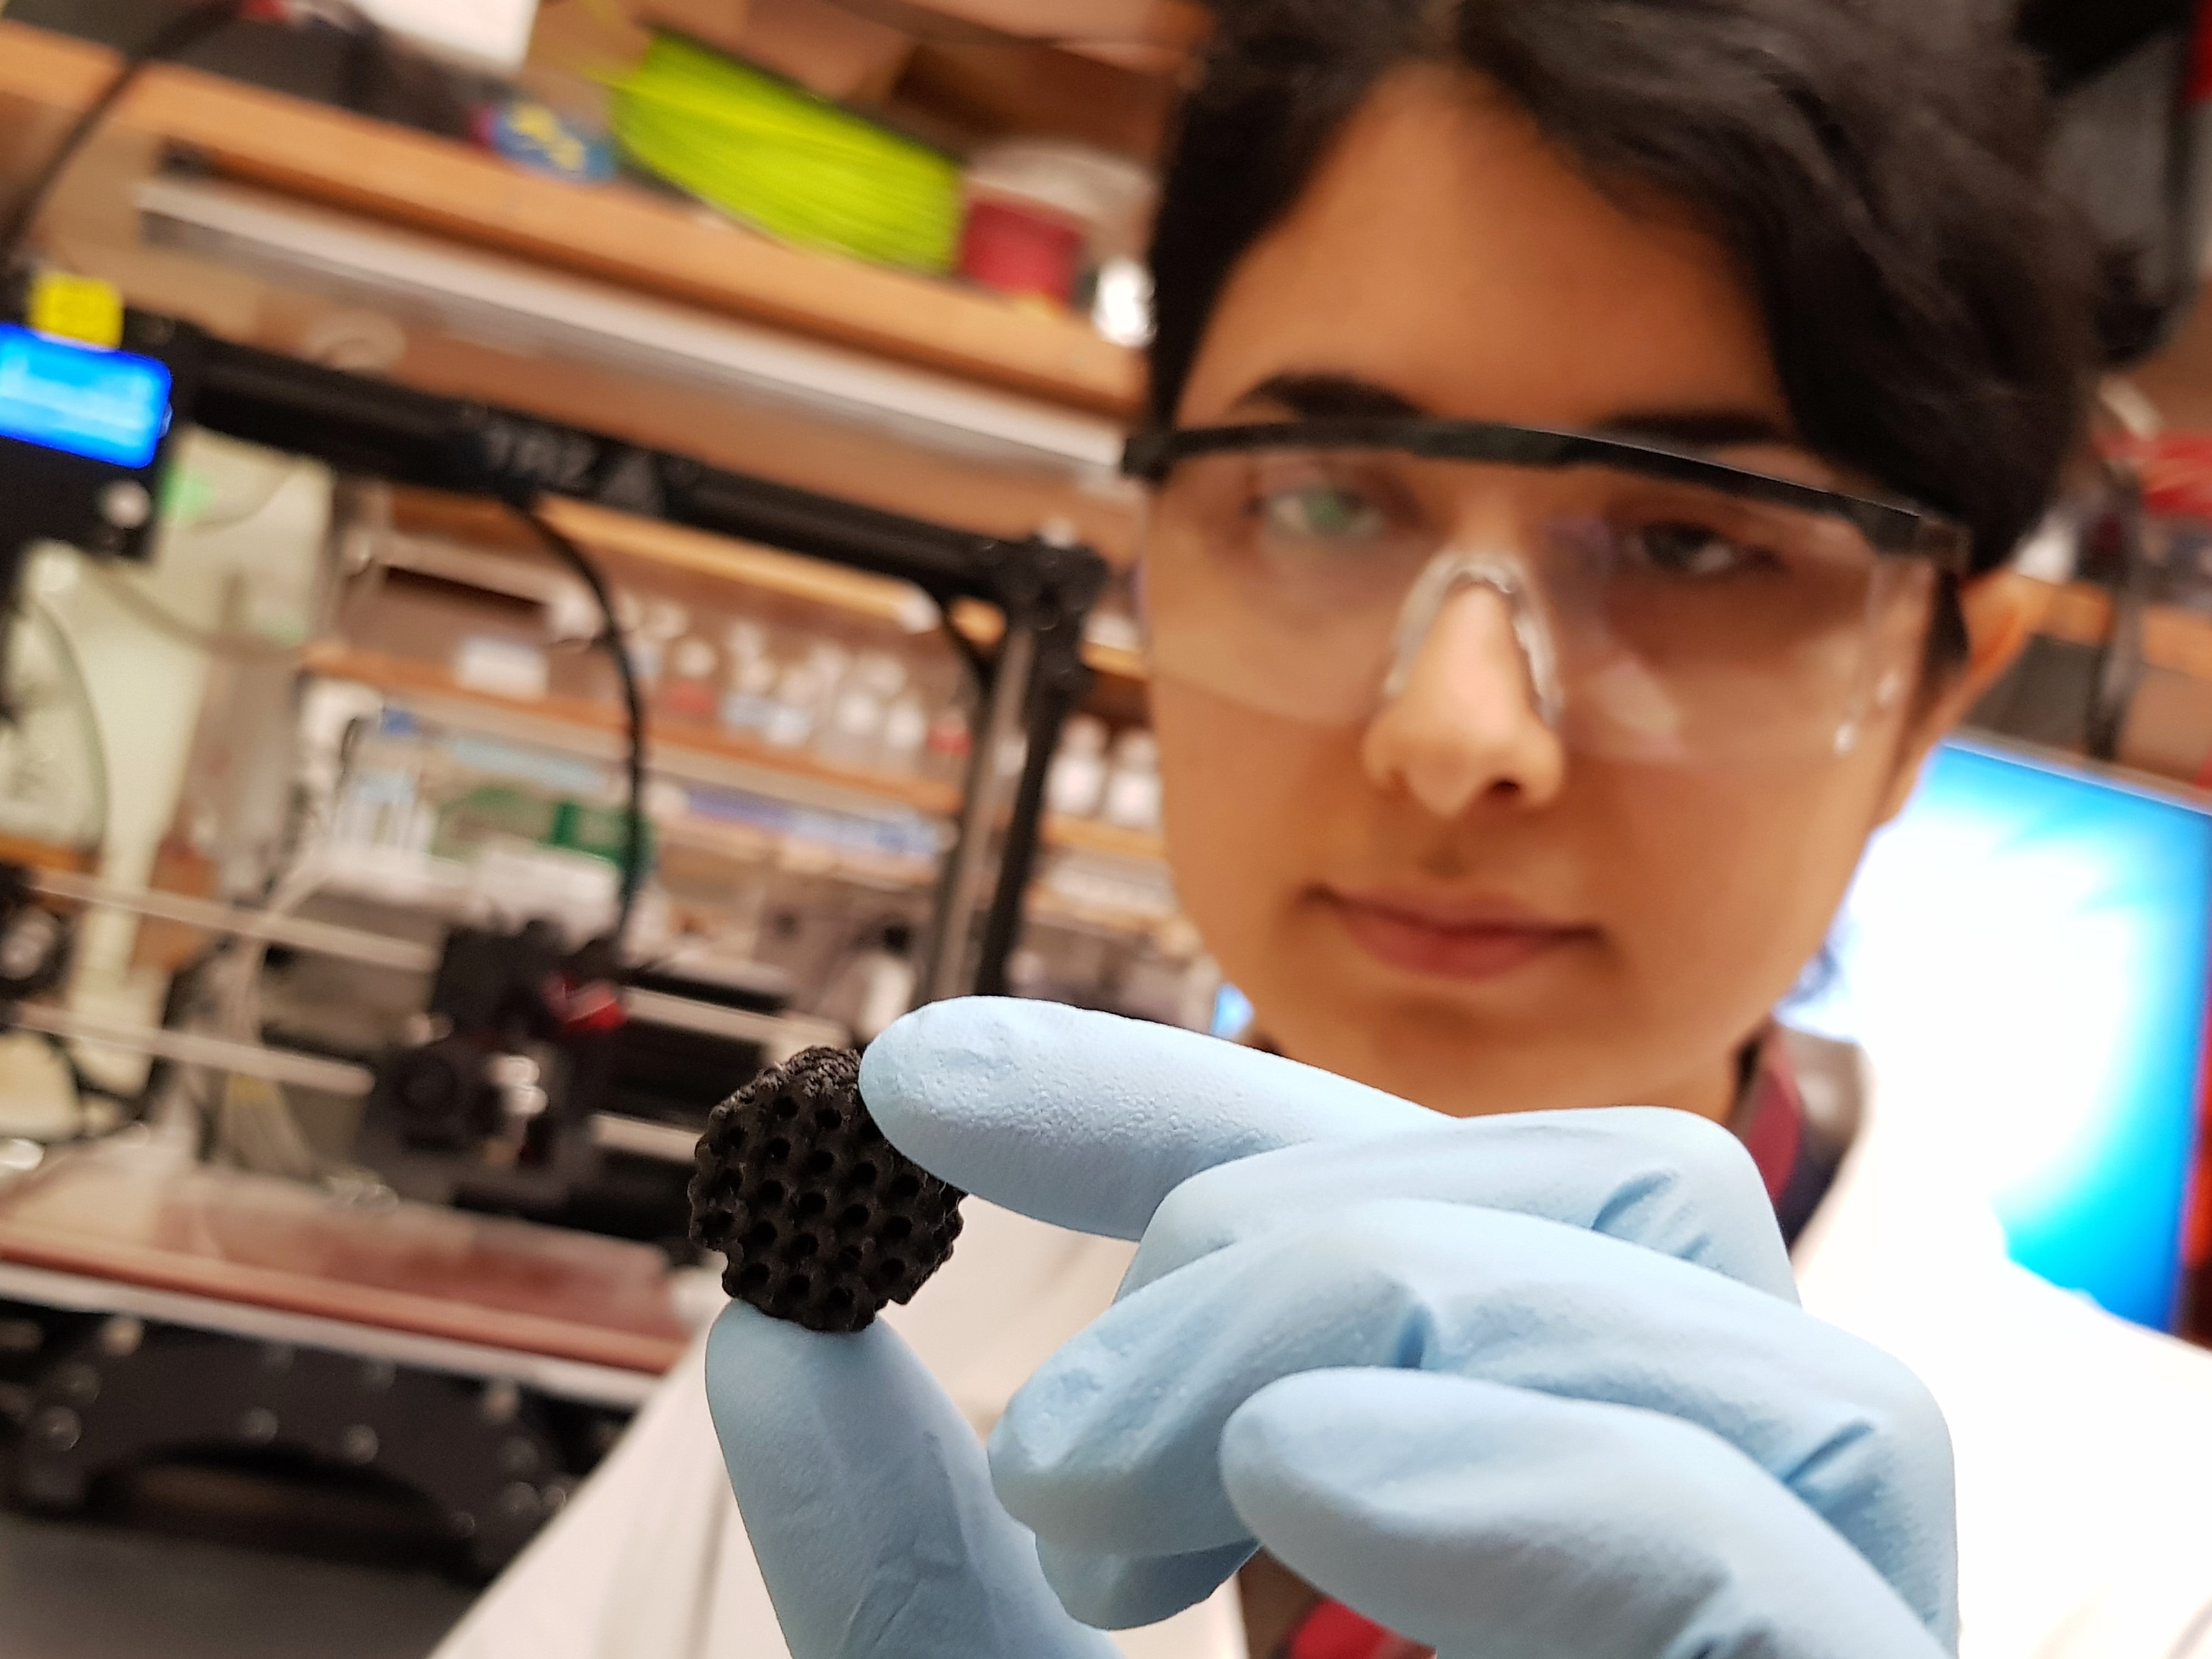 PhD student Elham Davoodi led a project to develop a new sensing material using nanotechnology and 3D printing.